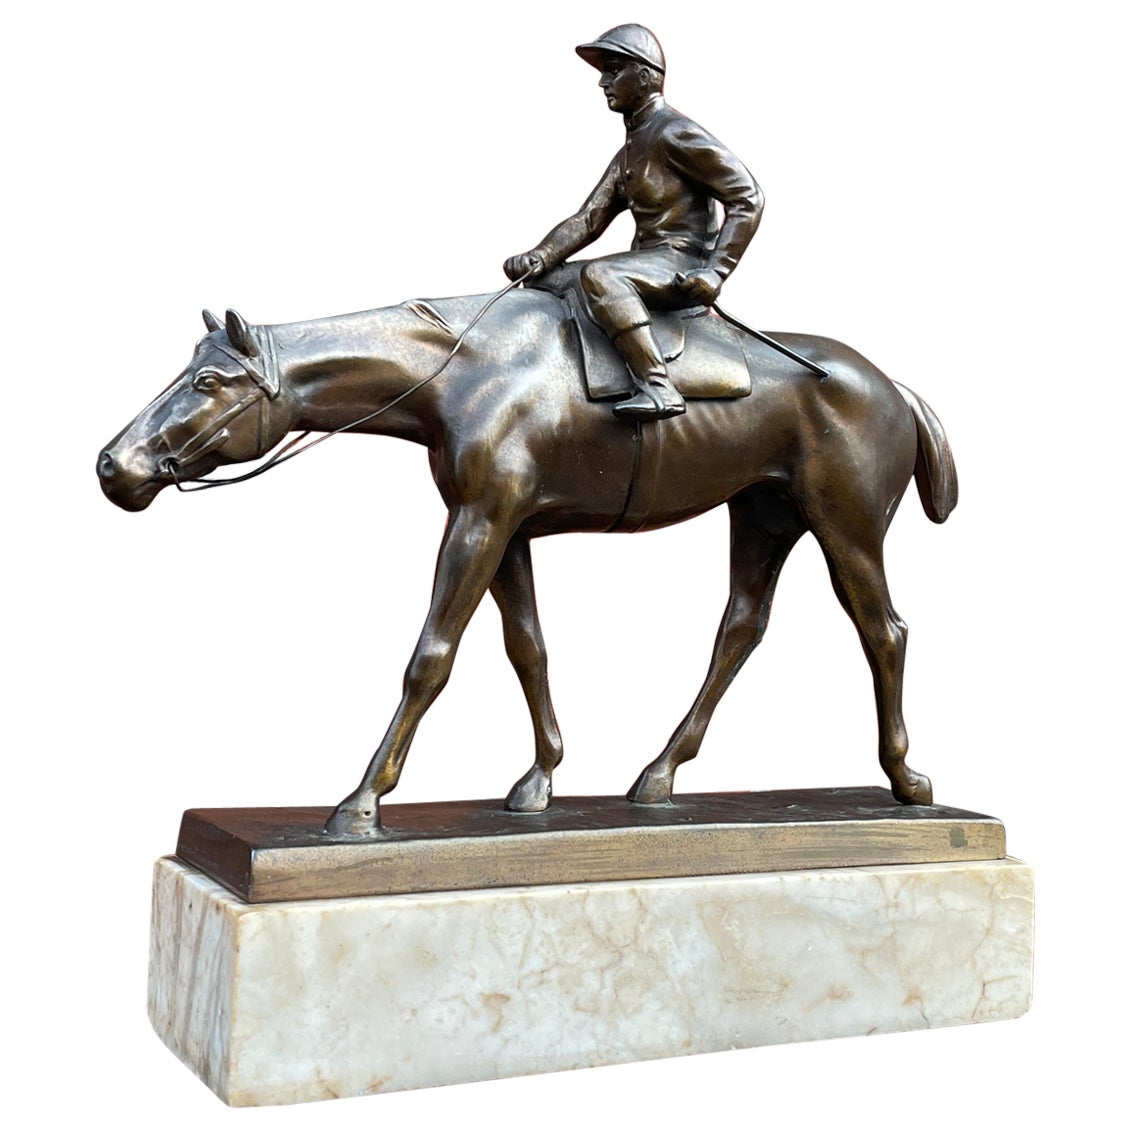 Antique & Stunning Bronzed Thoroughbred Racing Horse and Jockey on Marble Base